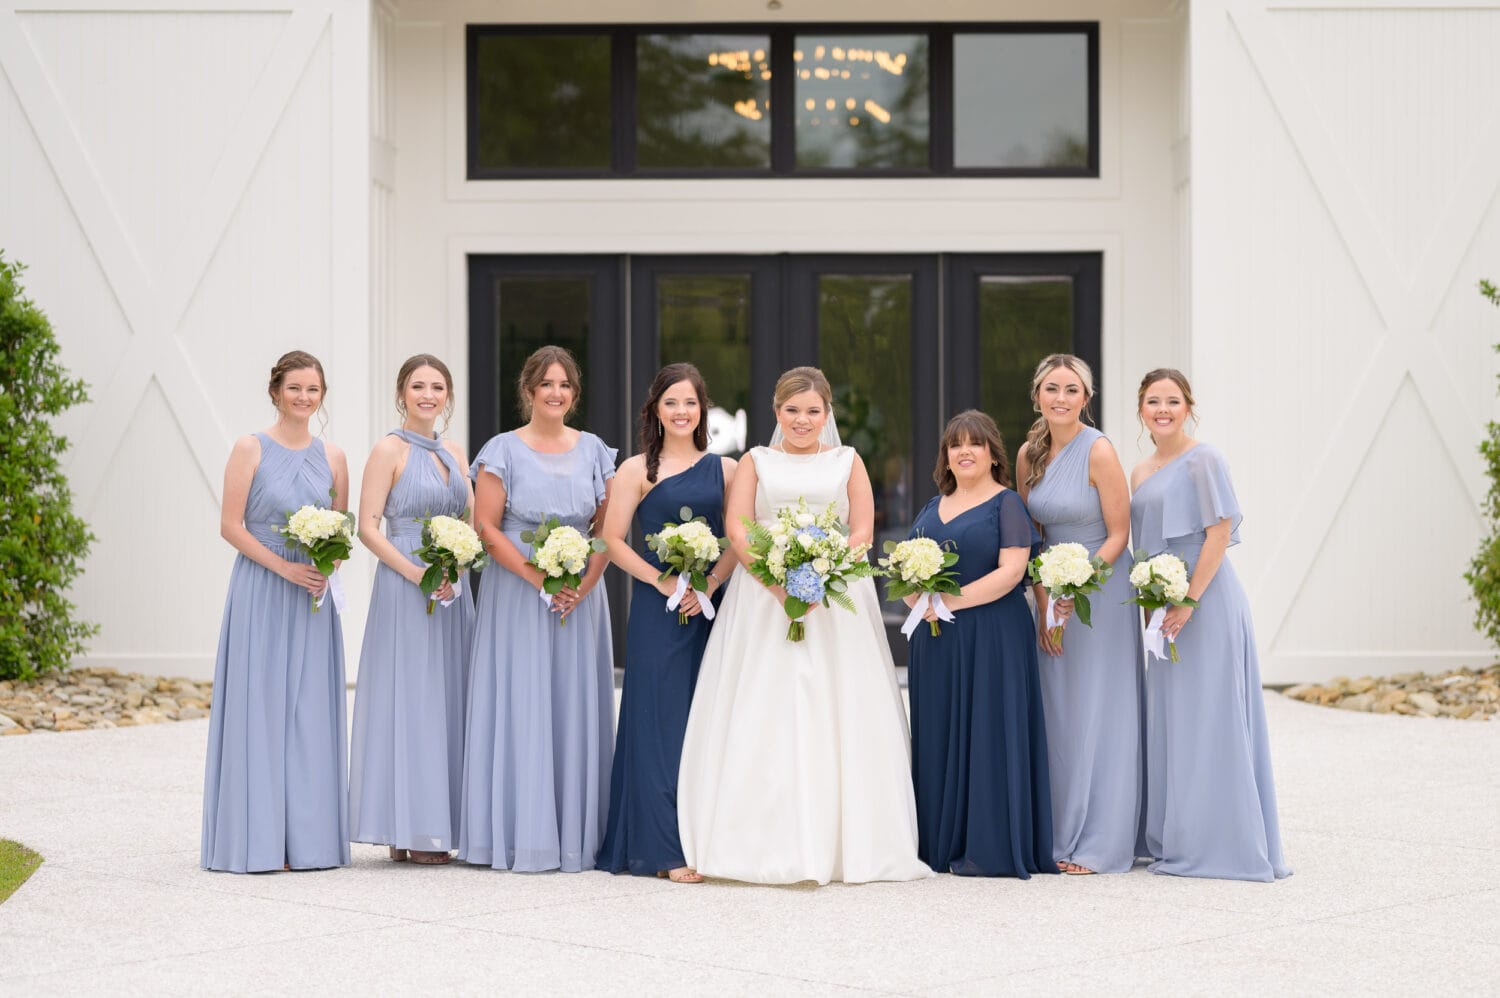 Bride with bridesmaids in front of the doors - The Venue at White Oaks Farm